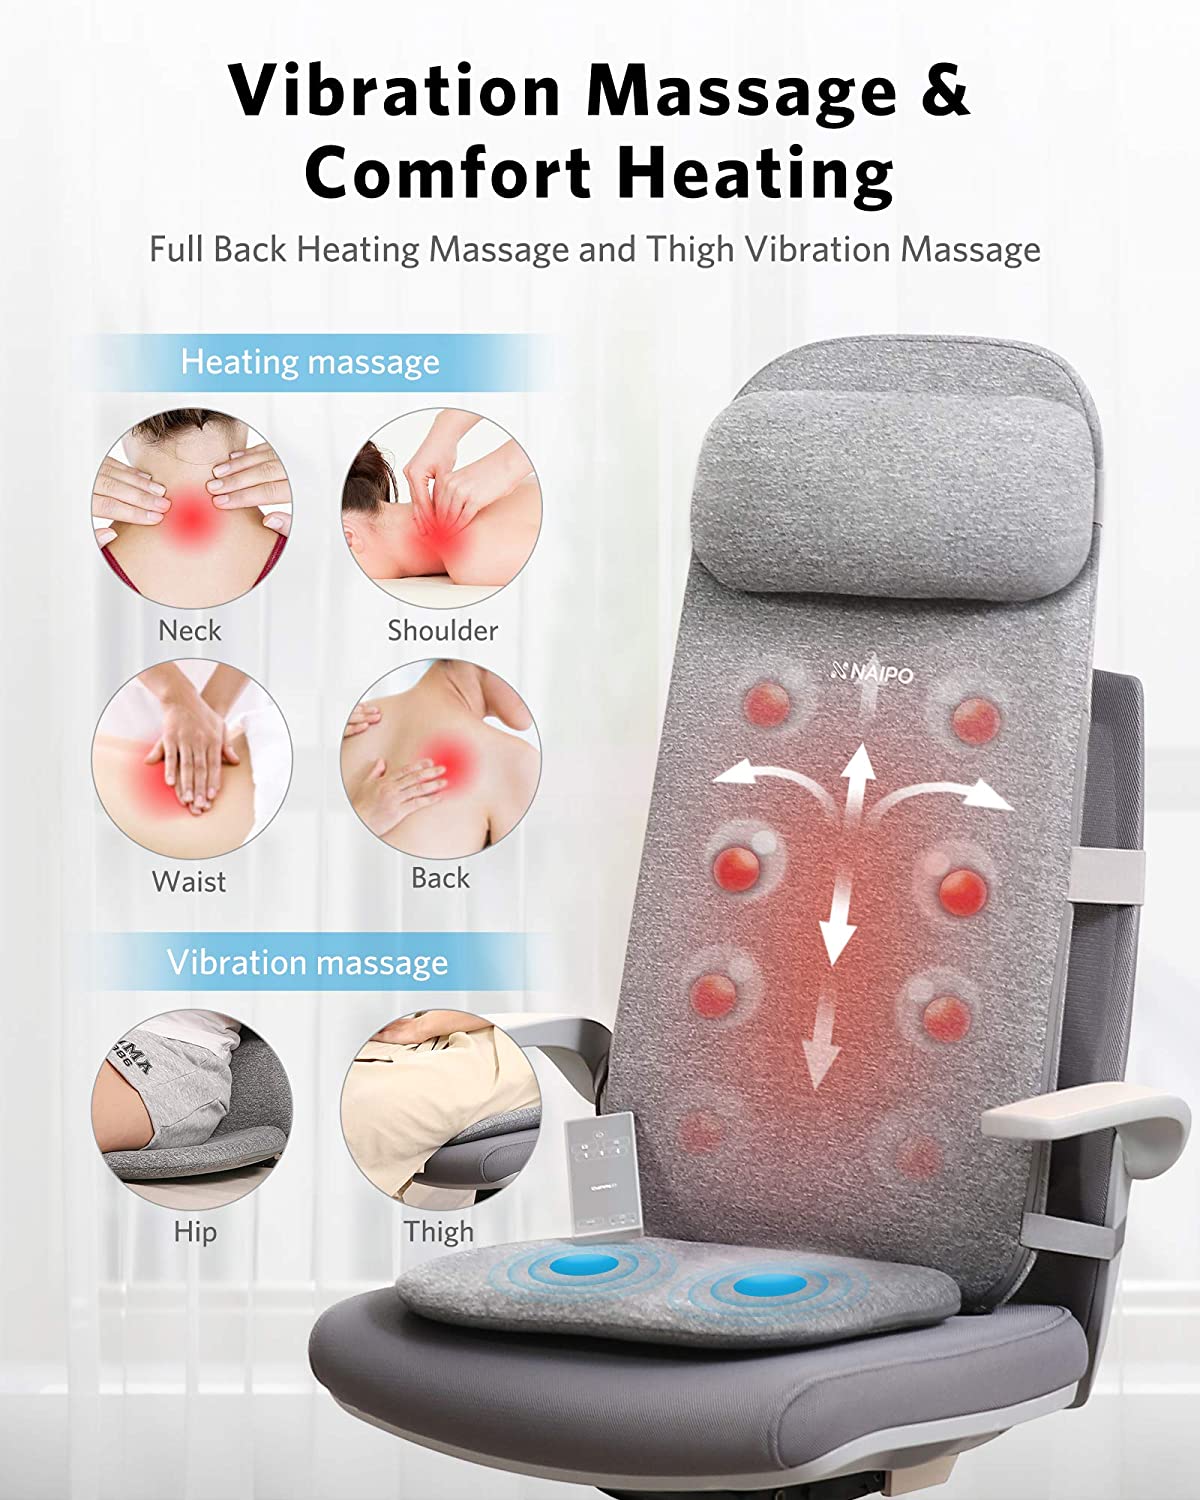 Load image into Gallery viewer, Naipo Shiatsu Massage Cushion with Heat and Vibration, Massage Chair Pad to Relax Full Back, Shoulders, Lumbar and Thighs, Stable and Portable Back Massager Mat for Home, Office Use, Grey - NAIPO
